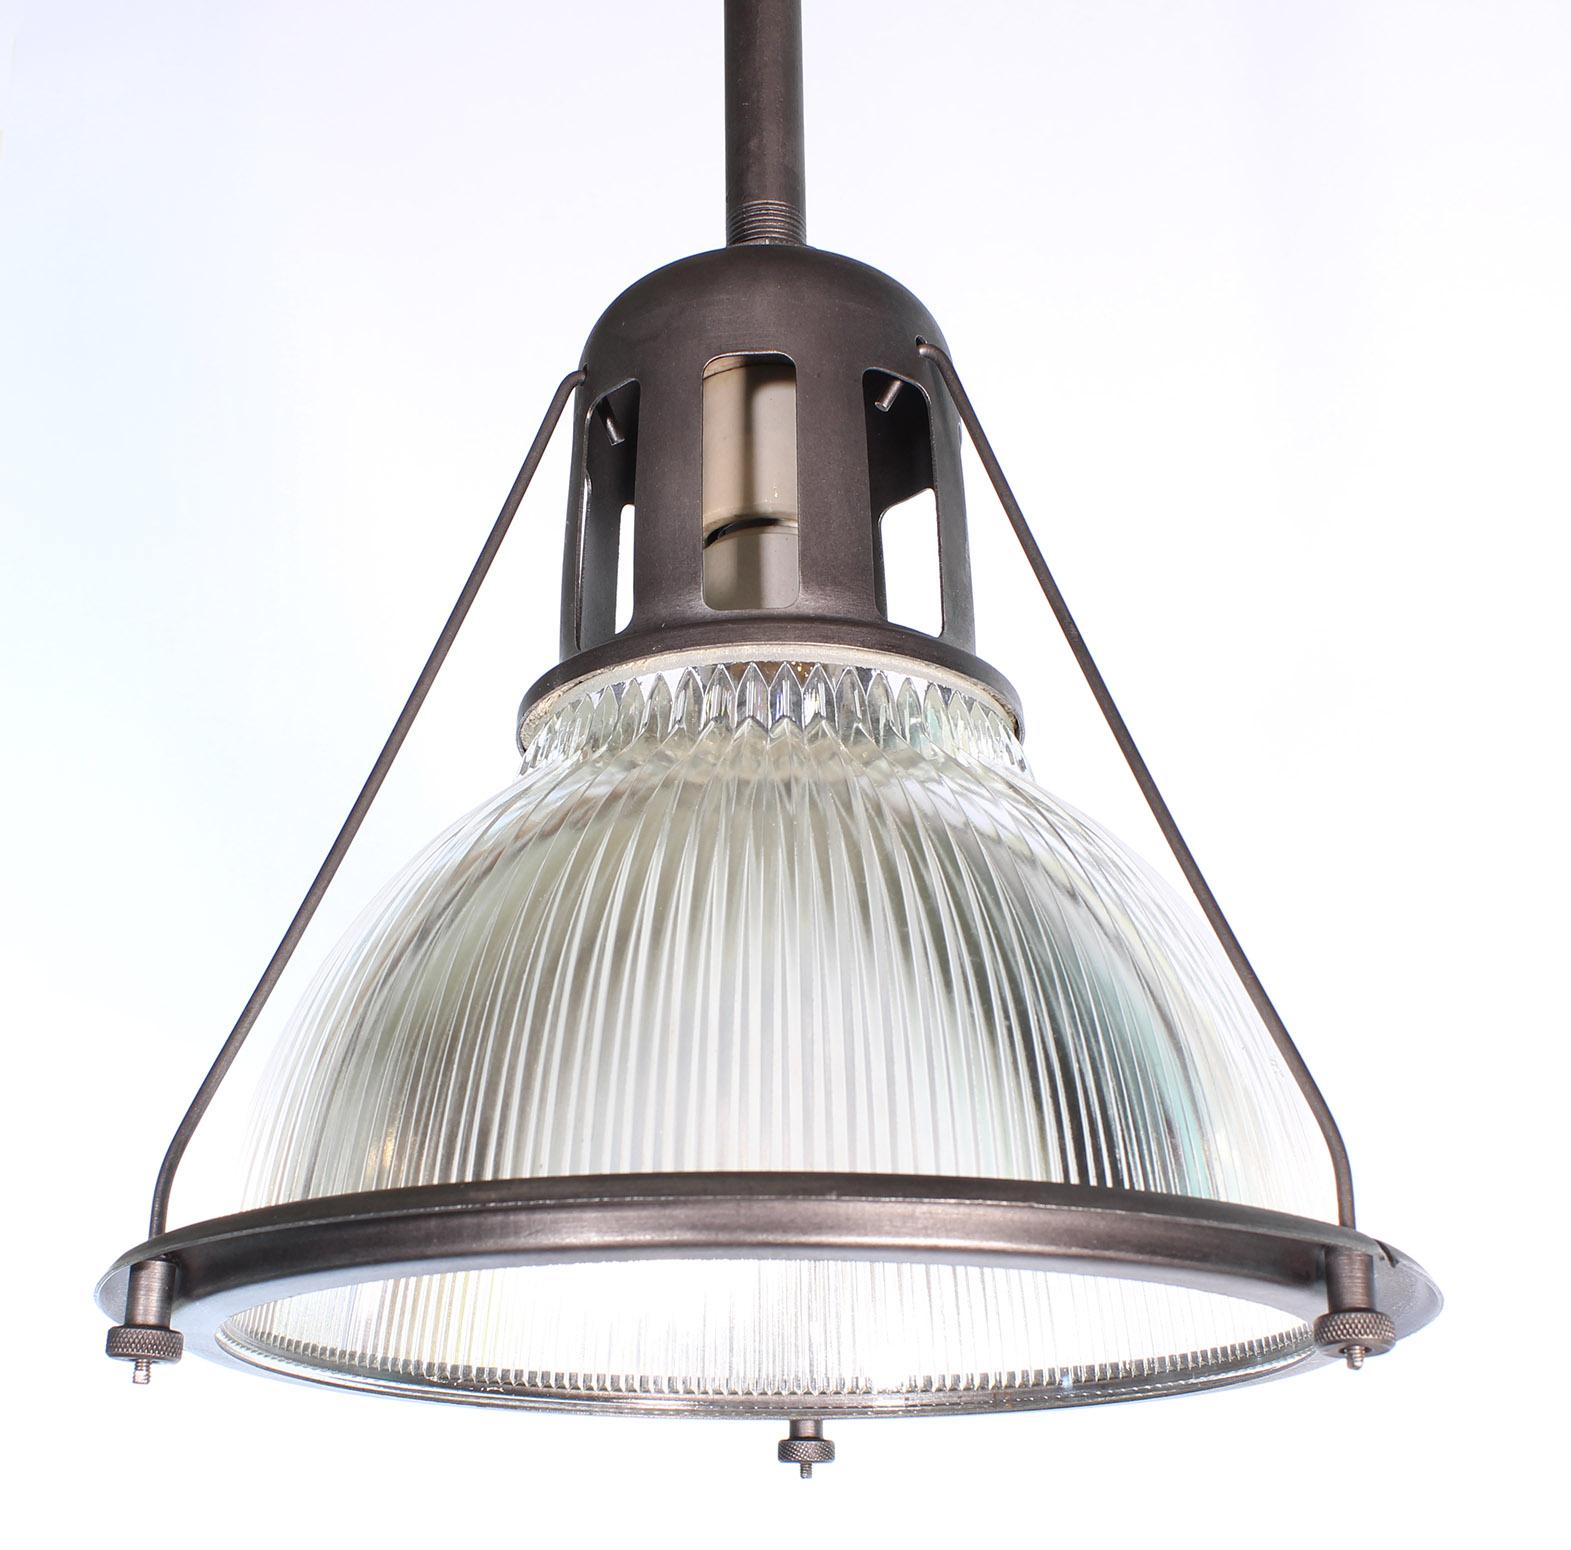 Authentic and original glass and steel Holophane industrial factory overhead ceiling lamp / pendant light. 11 1/4